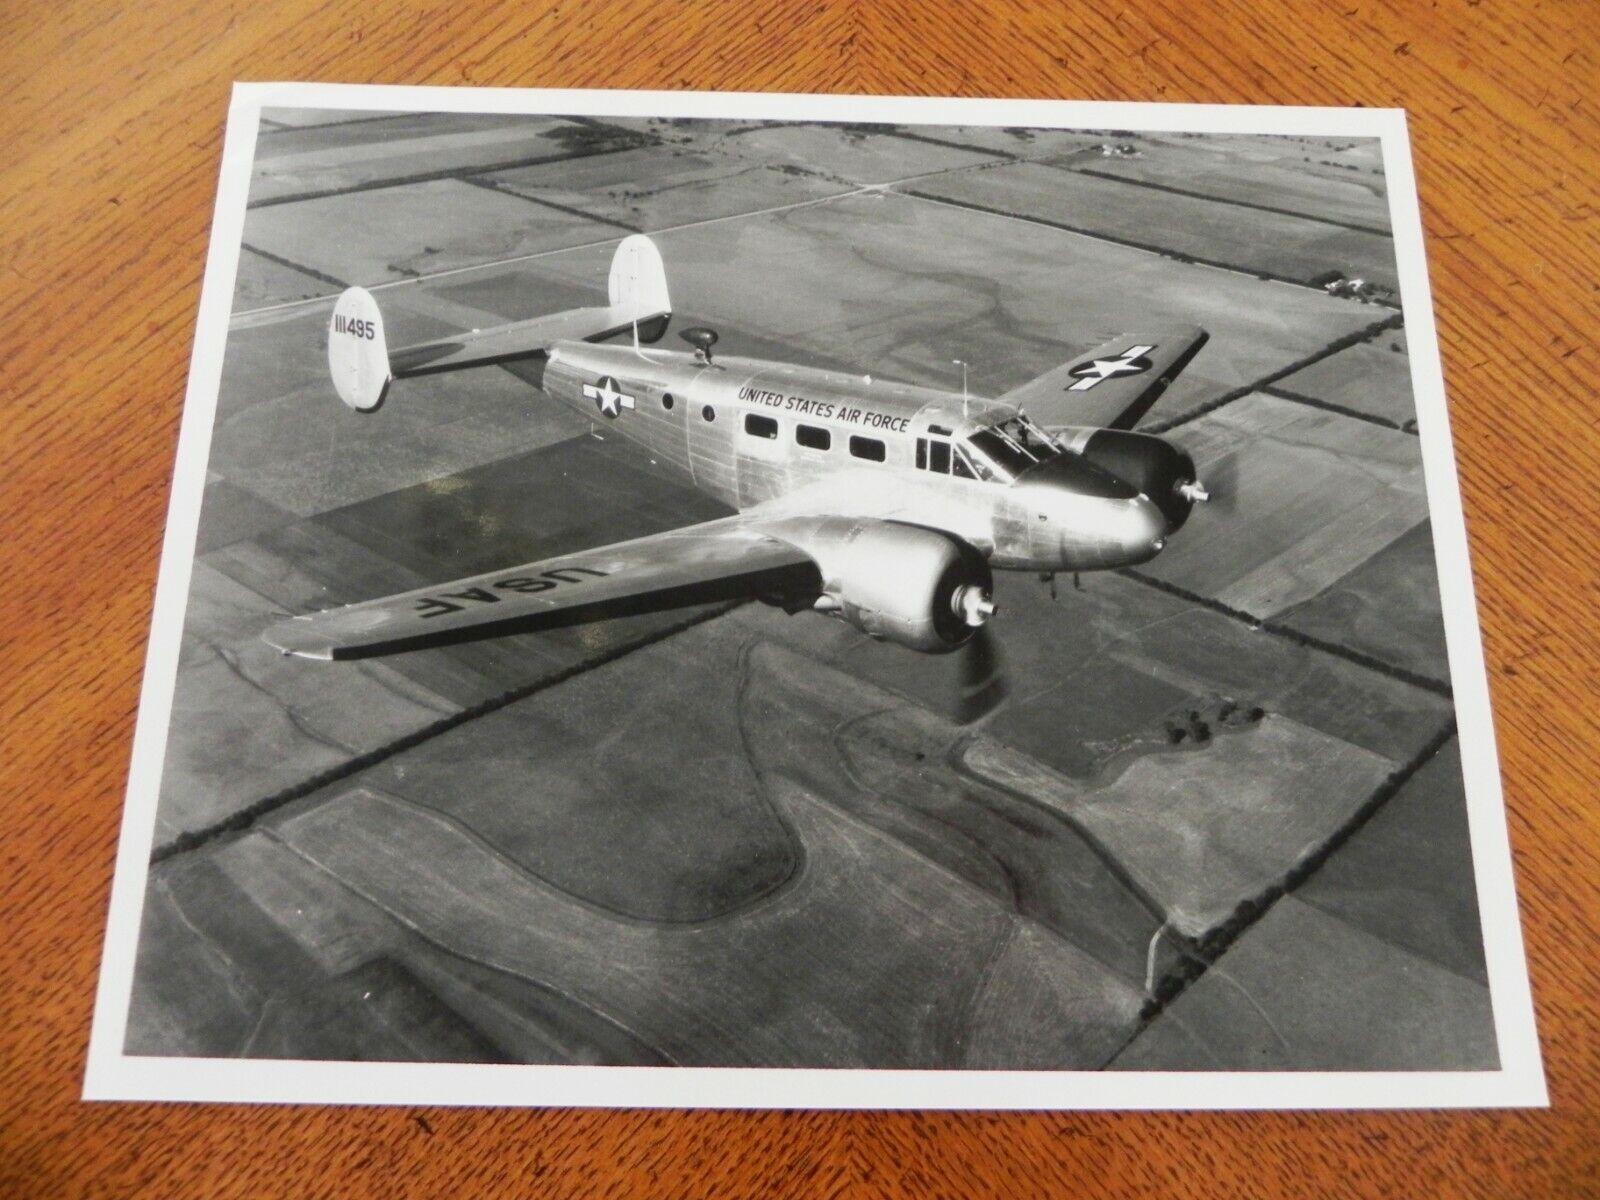 KGgallery Beechcraft USAF Photo C45G Military Twin Beech Airplane US Air Force